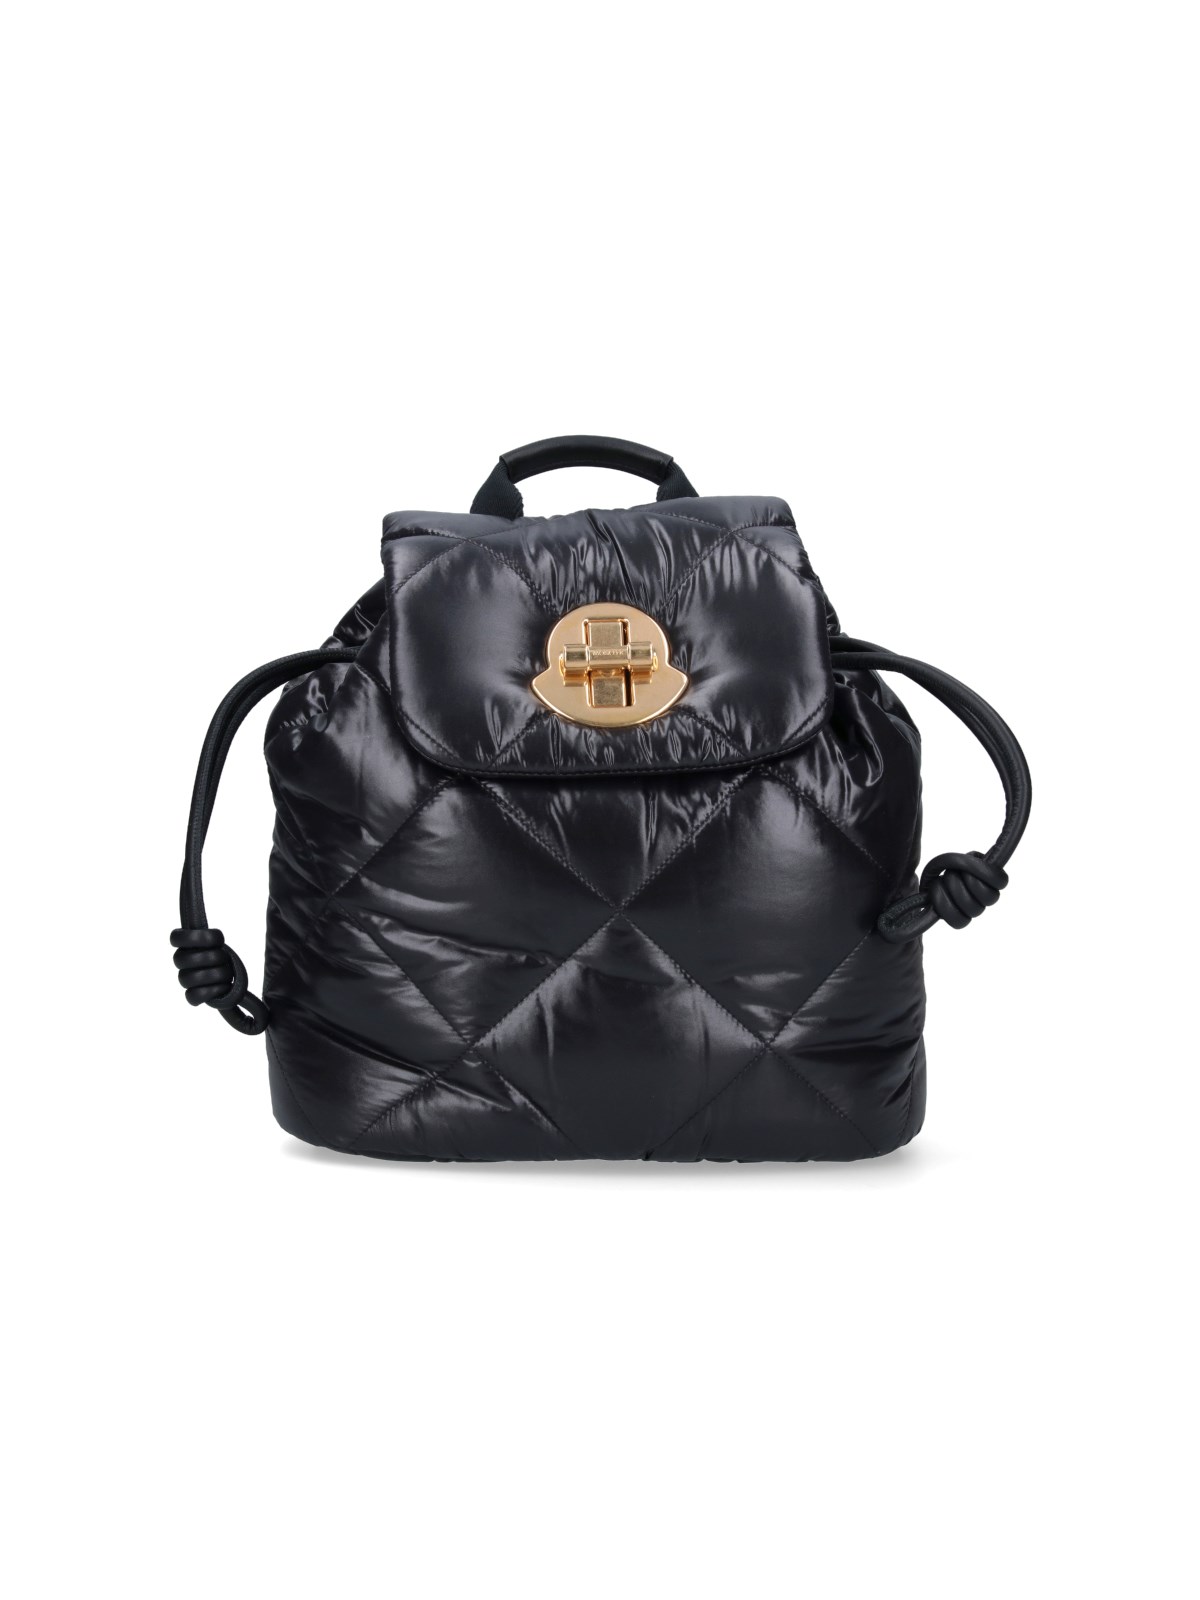 MONCLER 'PUF' BACKPACK